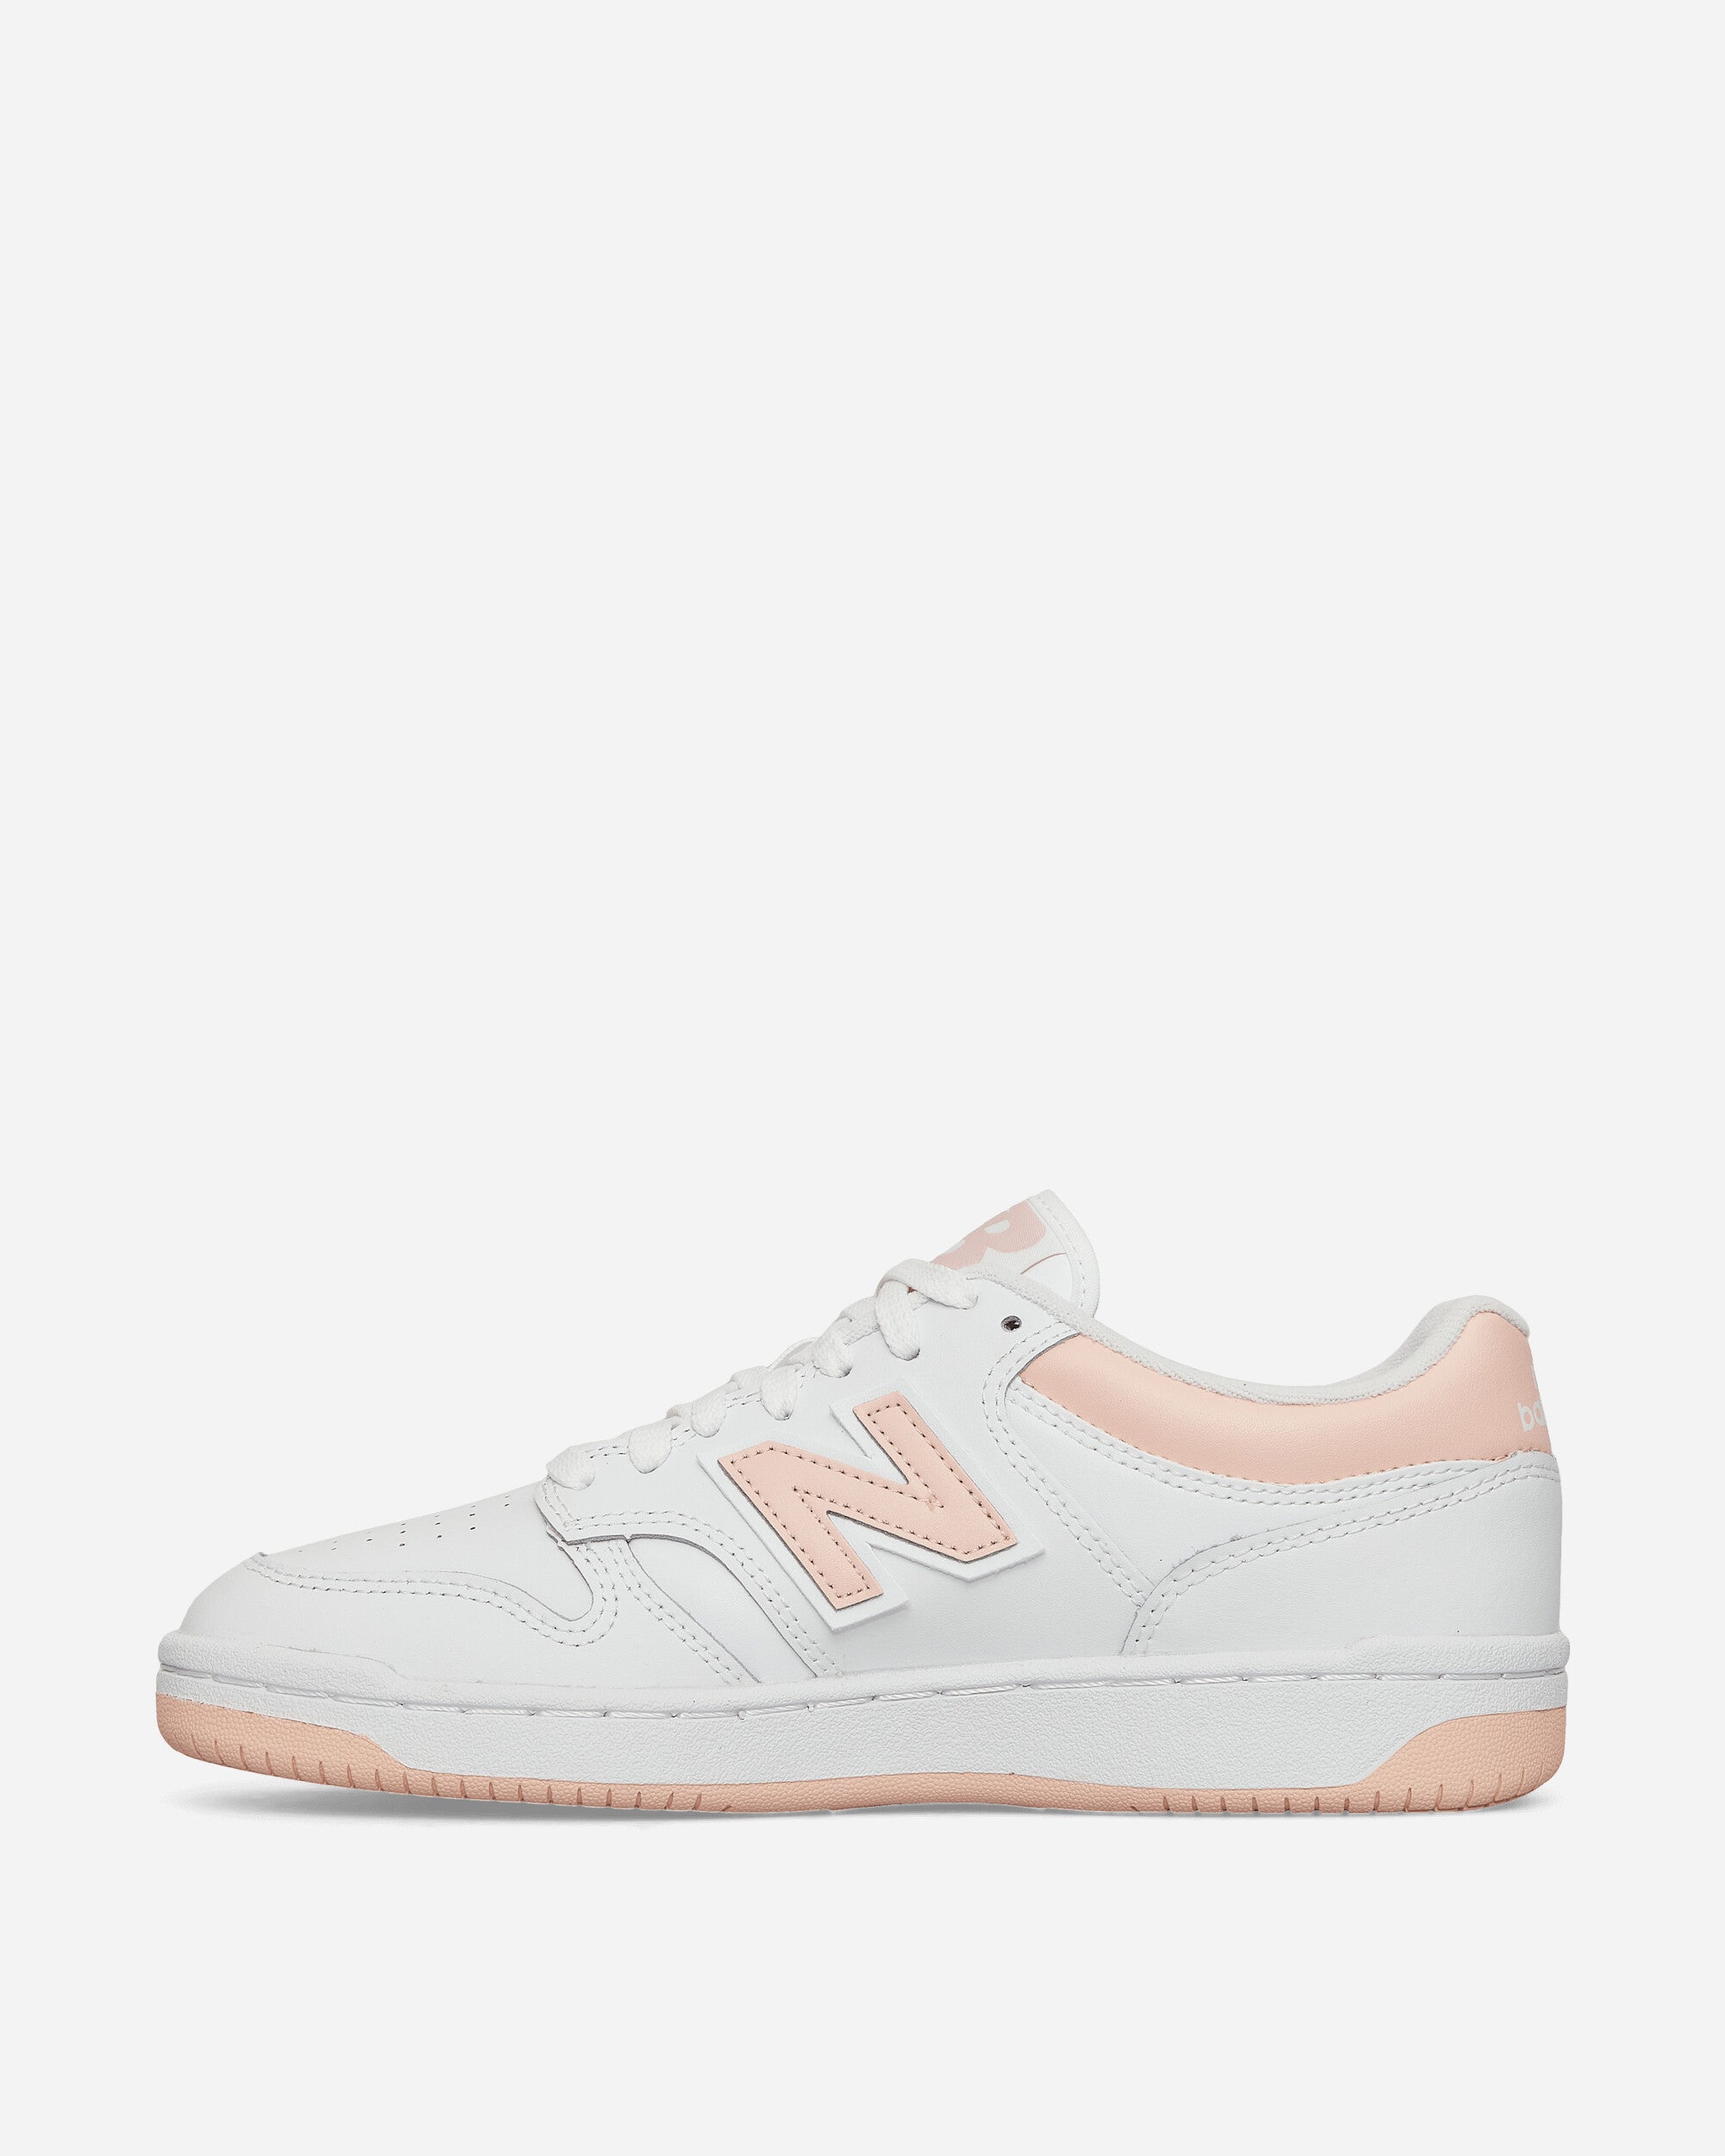 New 480 Sneakers White / Pink - Jam Official Store